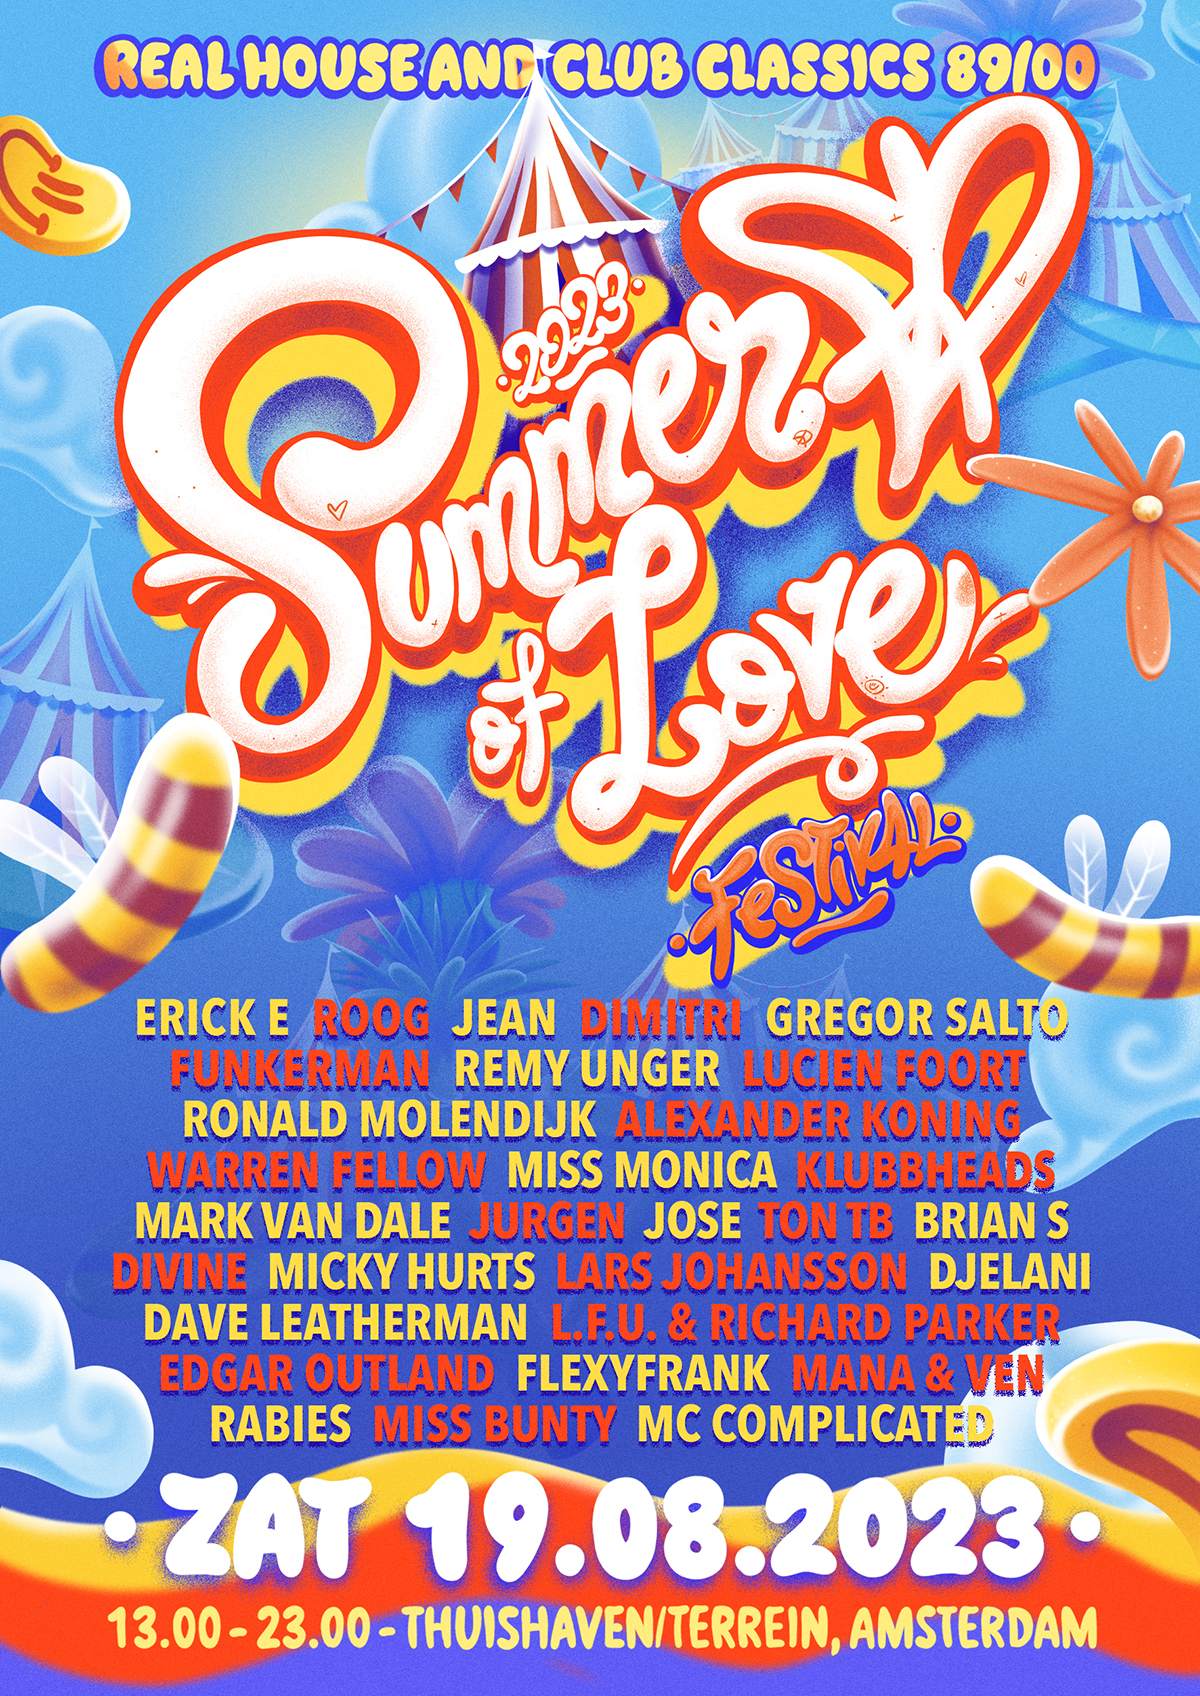 SOLD OUT - Summer Of Love - Thuishaven[terrein] - Real House & Club Classics 89/05 - フライヤー裏